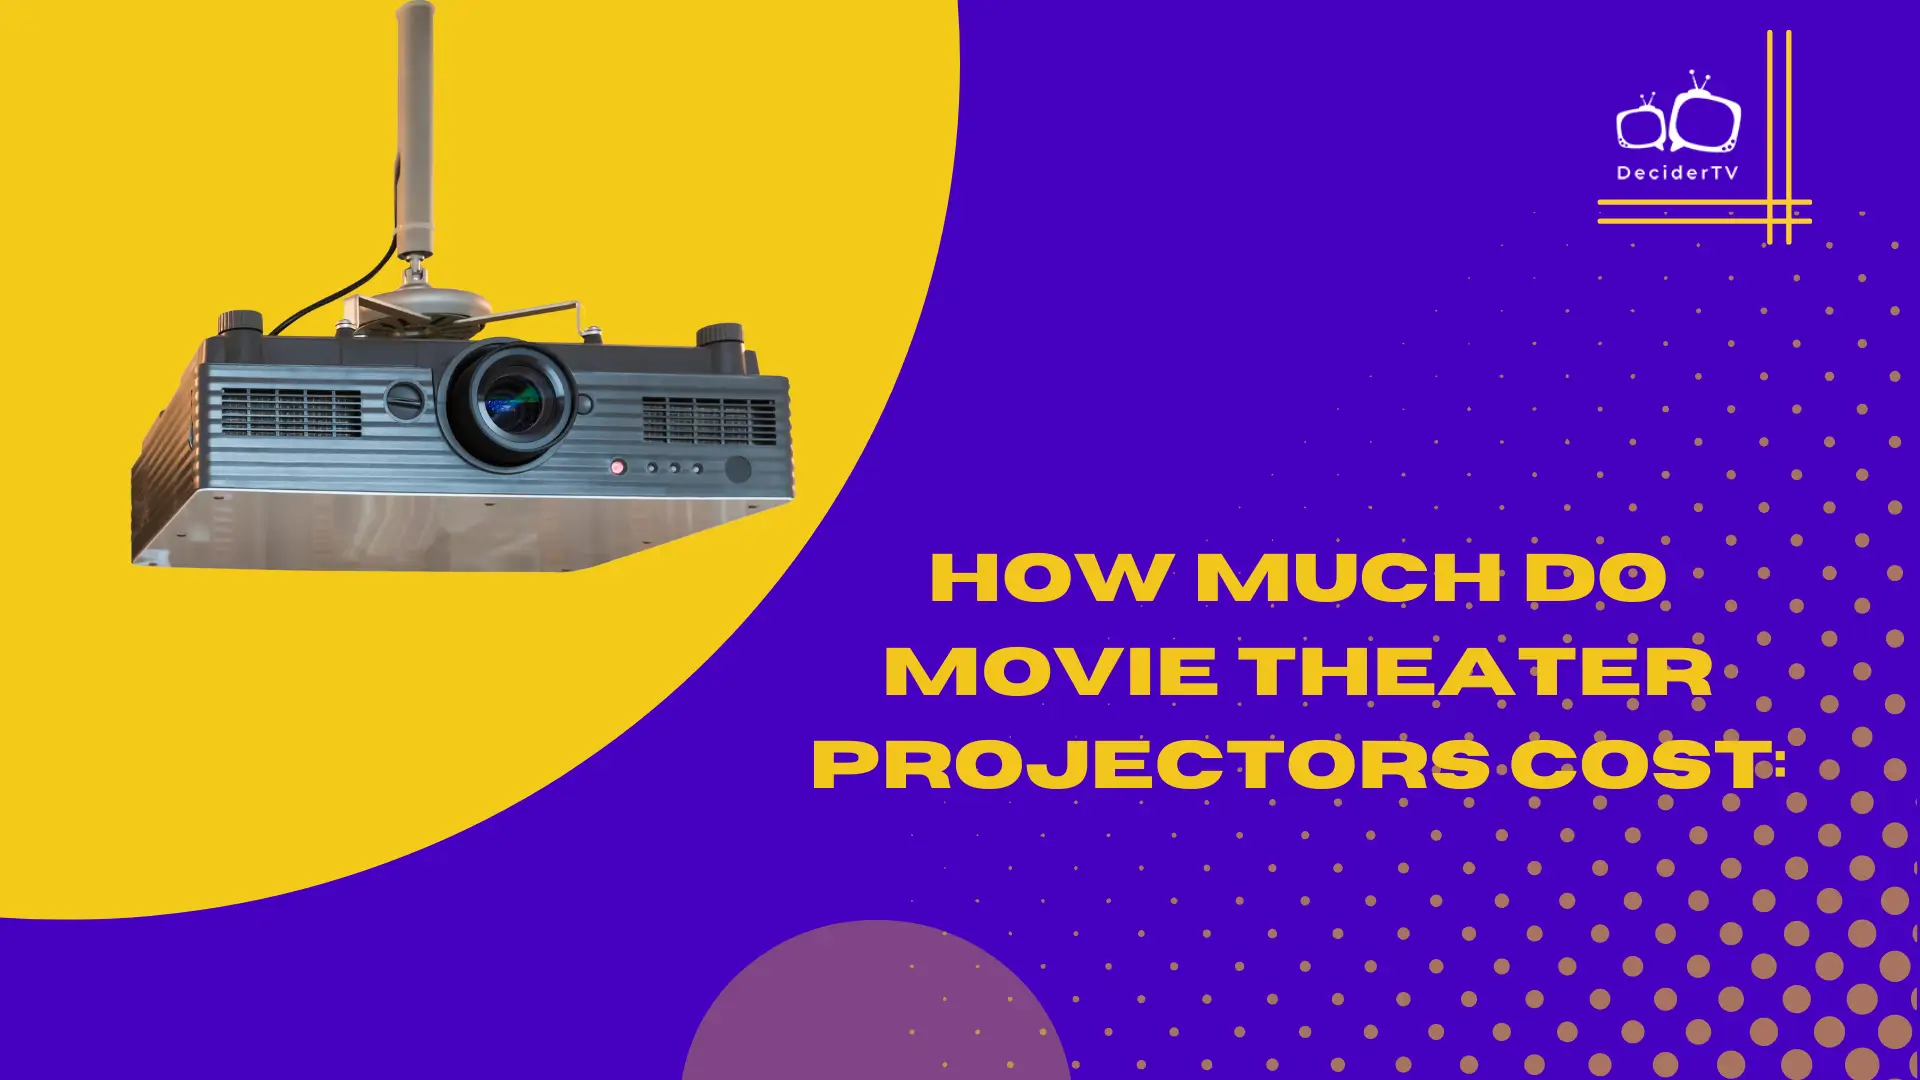 How Much Do Movie Theater Projectors Cost?